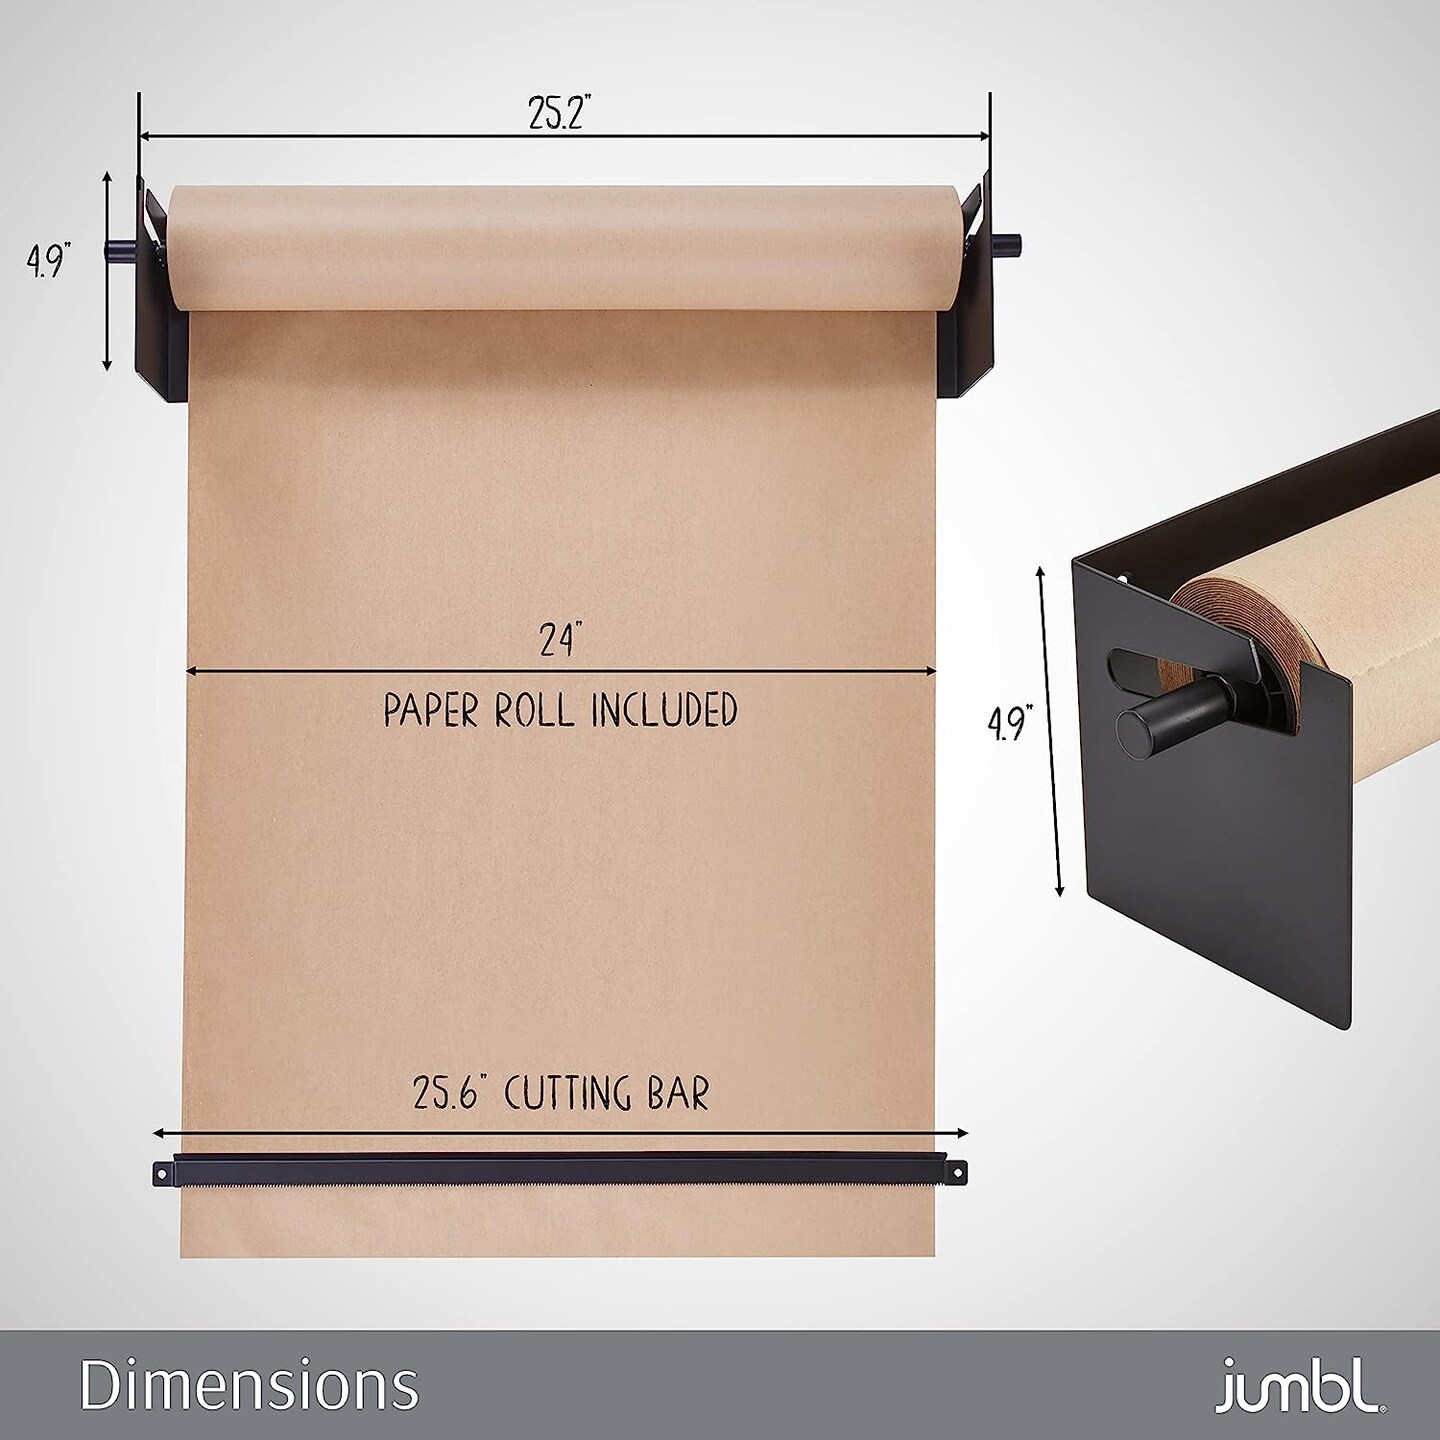 Excello Global Products Wall Mounted Kraft Paper Dispenser & Cutter: Includes 50 Meter Long Kraft Paper Roll - Perfect for To-Do Lists Daily Speci